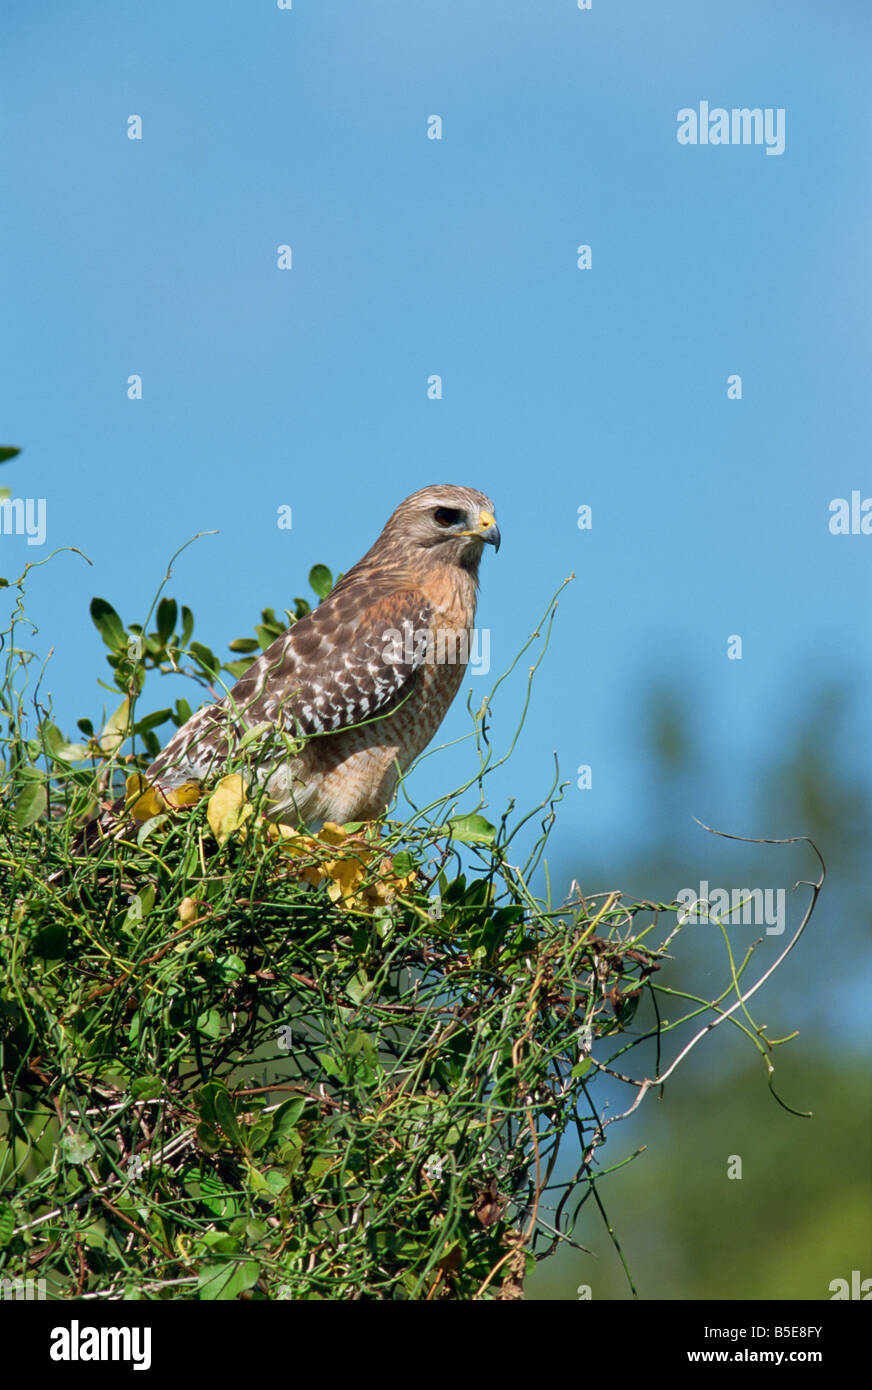 Red Shouldered Hawk South Florida USA R Rainford Stock Photo